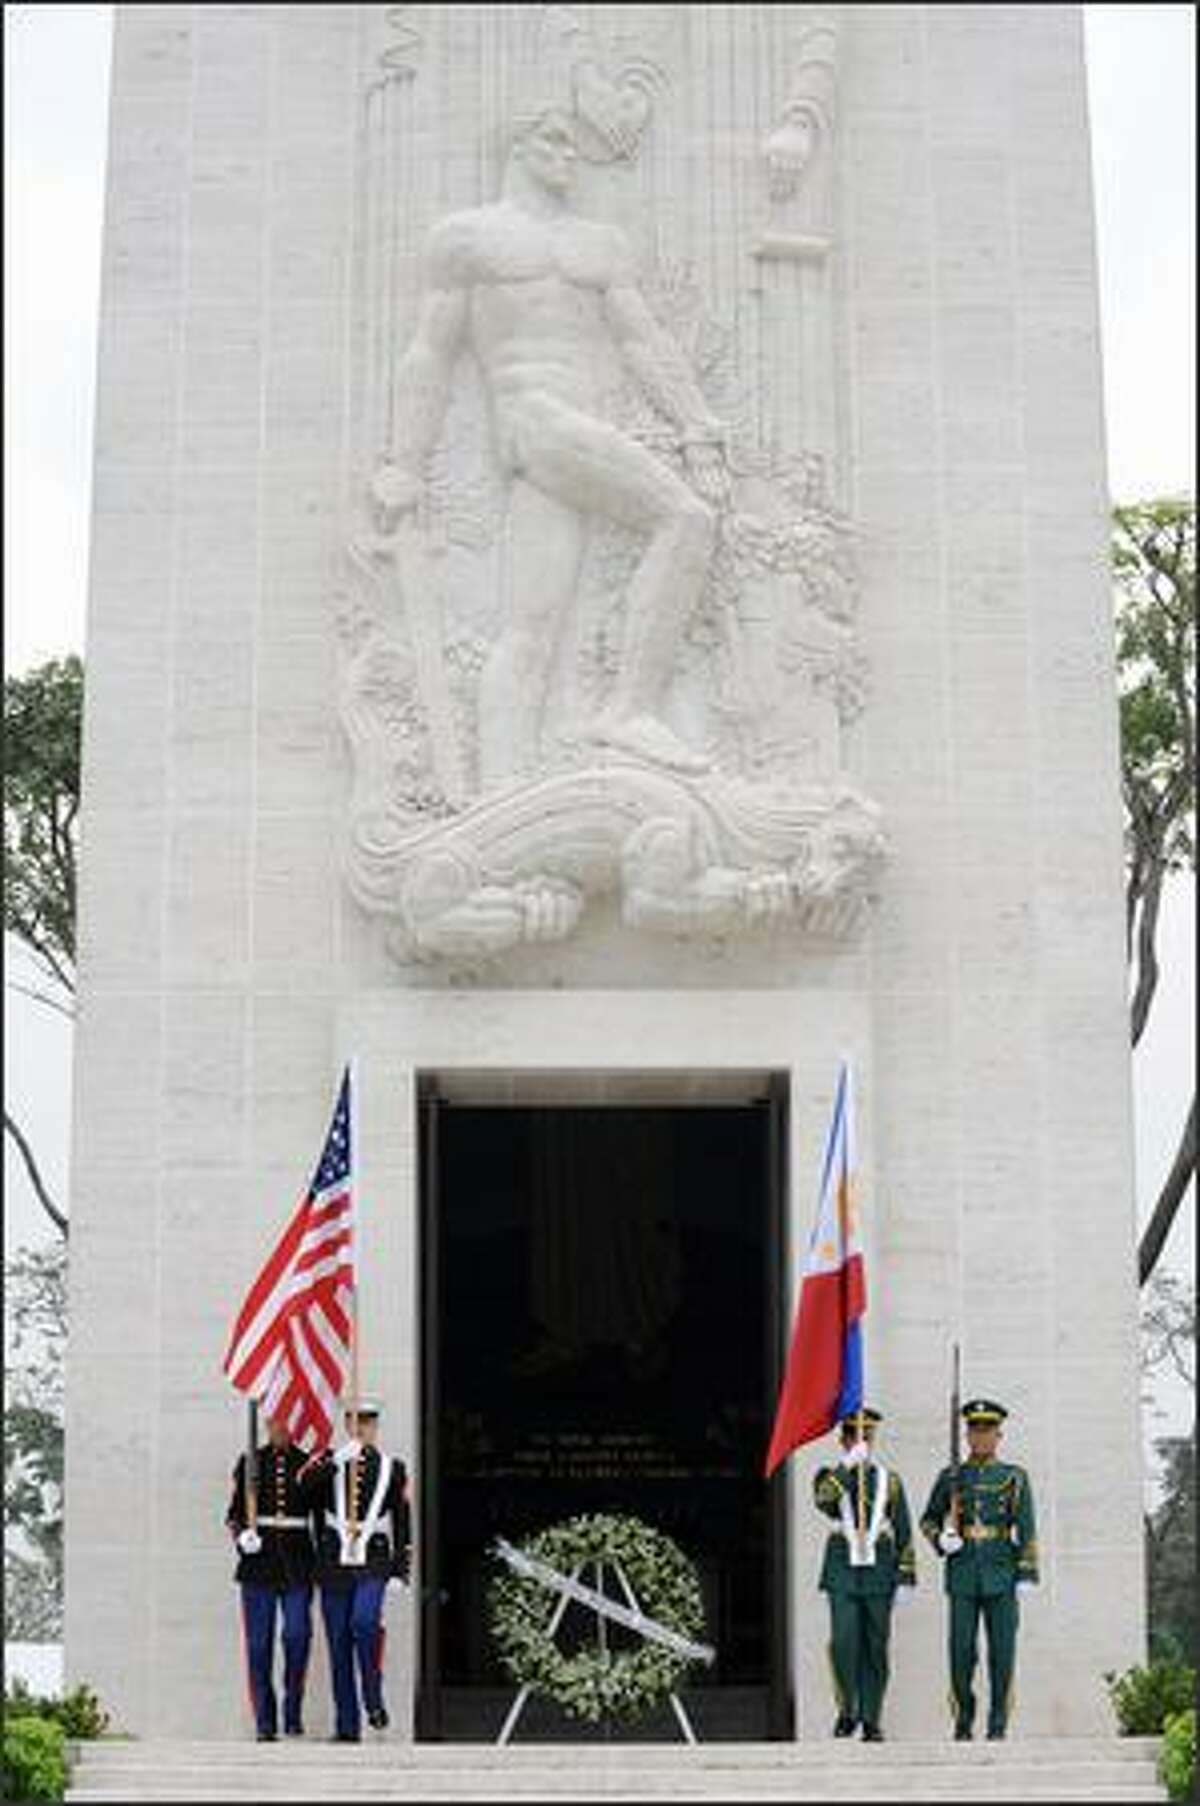 Philippine and U.S. military honor guards carry the flags of the Philippines and the U.S. at the war memorial at Manila American Cemetery during the annual Veterans' Day ceremony in Manila on Tuesday. The Veterans' Day mark the end of hosilities of World War I when the Armistice was signed November 11 -- the eleventh hour of the eleventh day of the eleventh month in 1918.